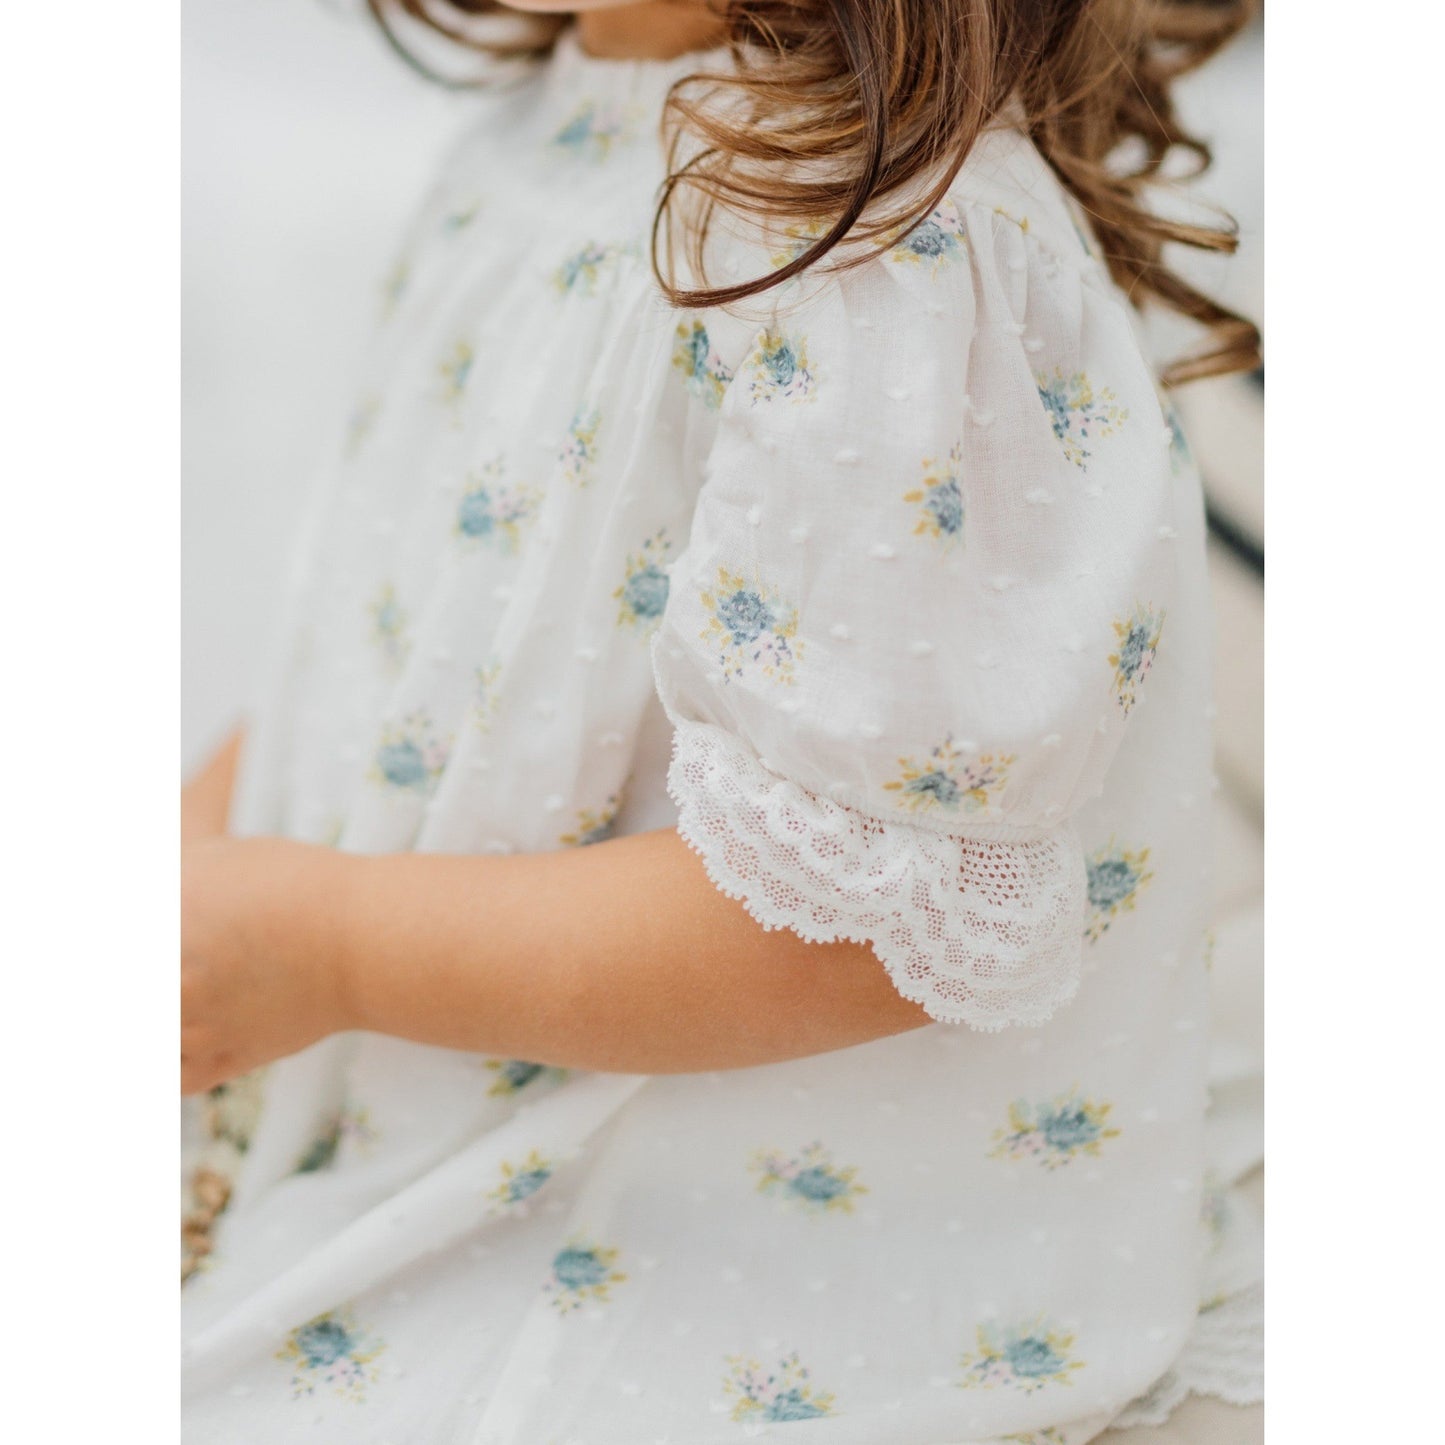 White and Blue Floral Dress 136 - Lala Kids 